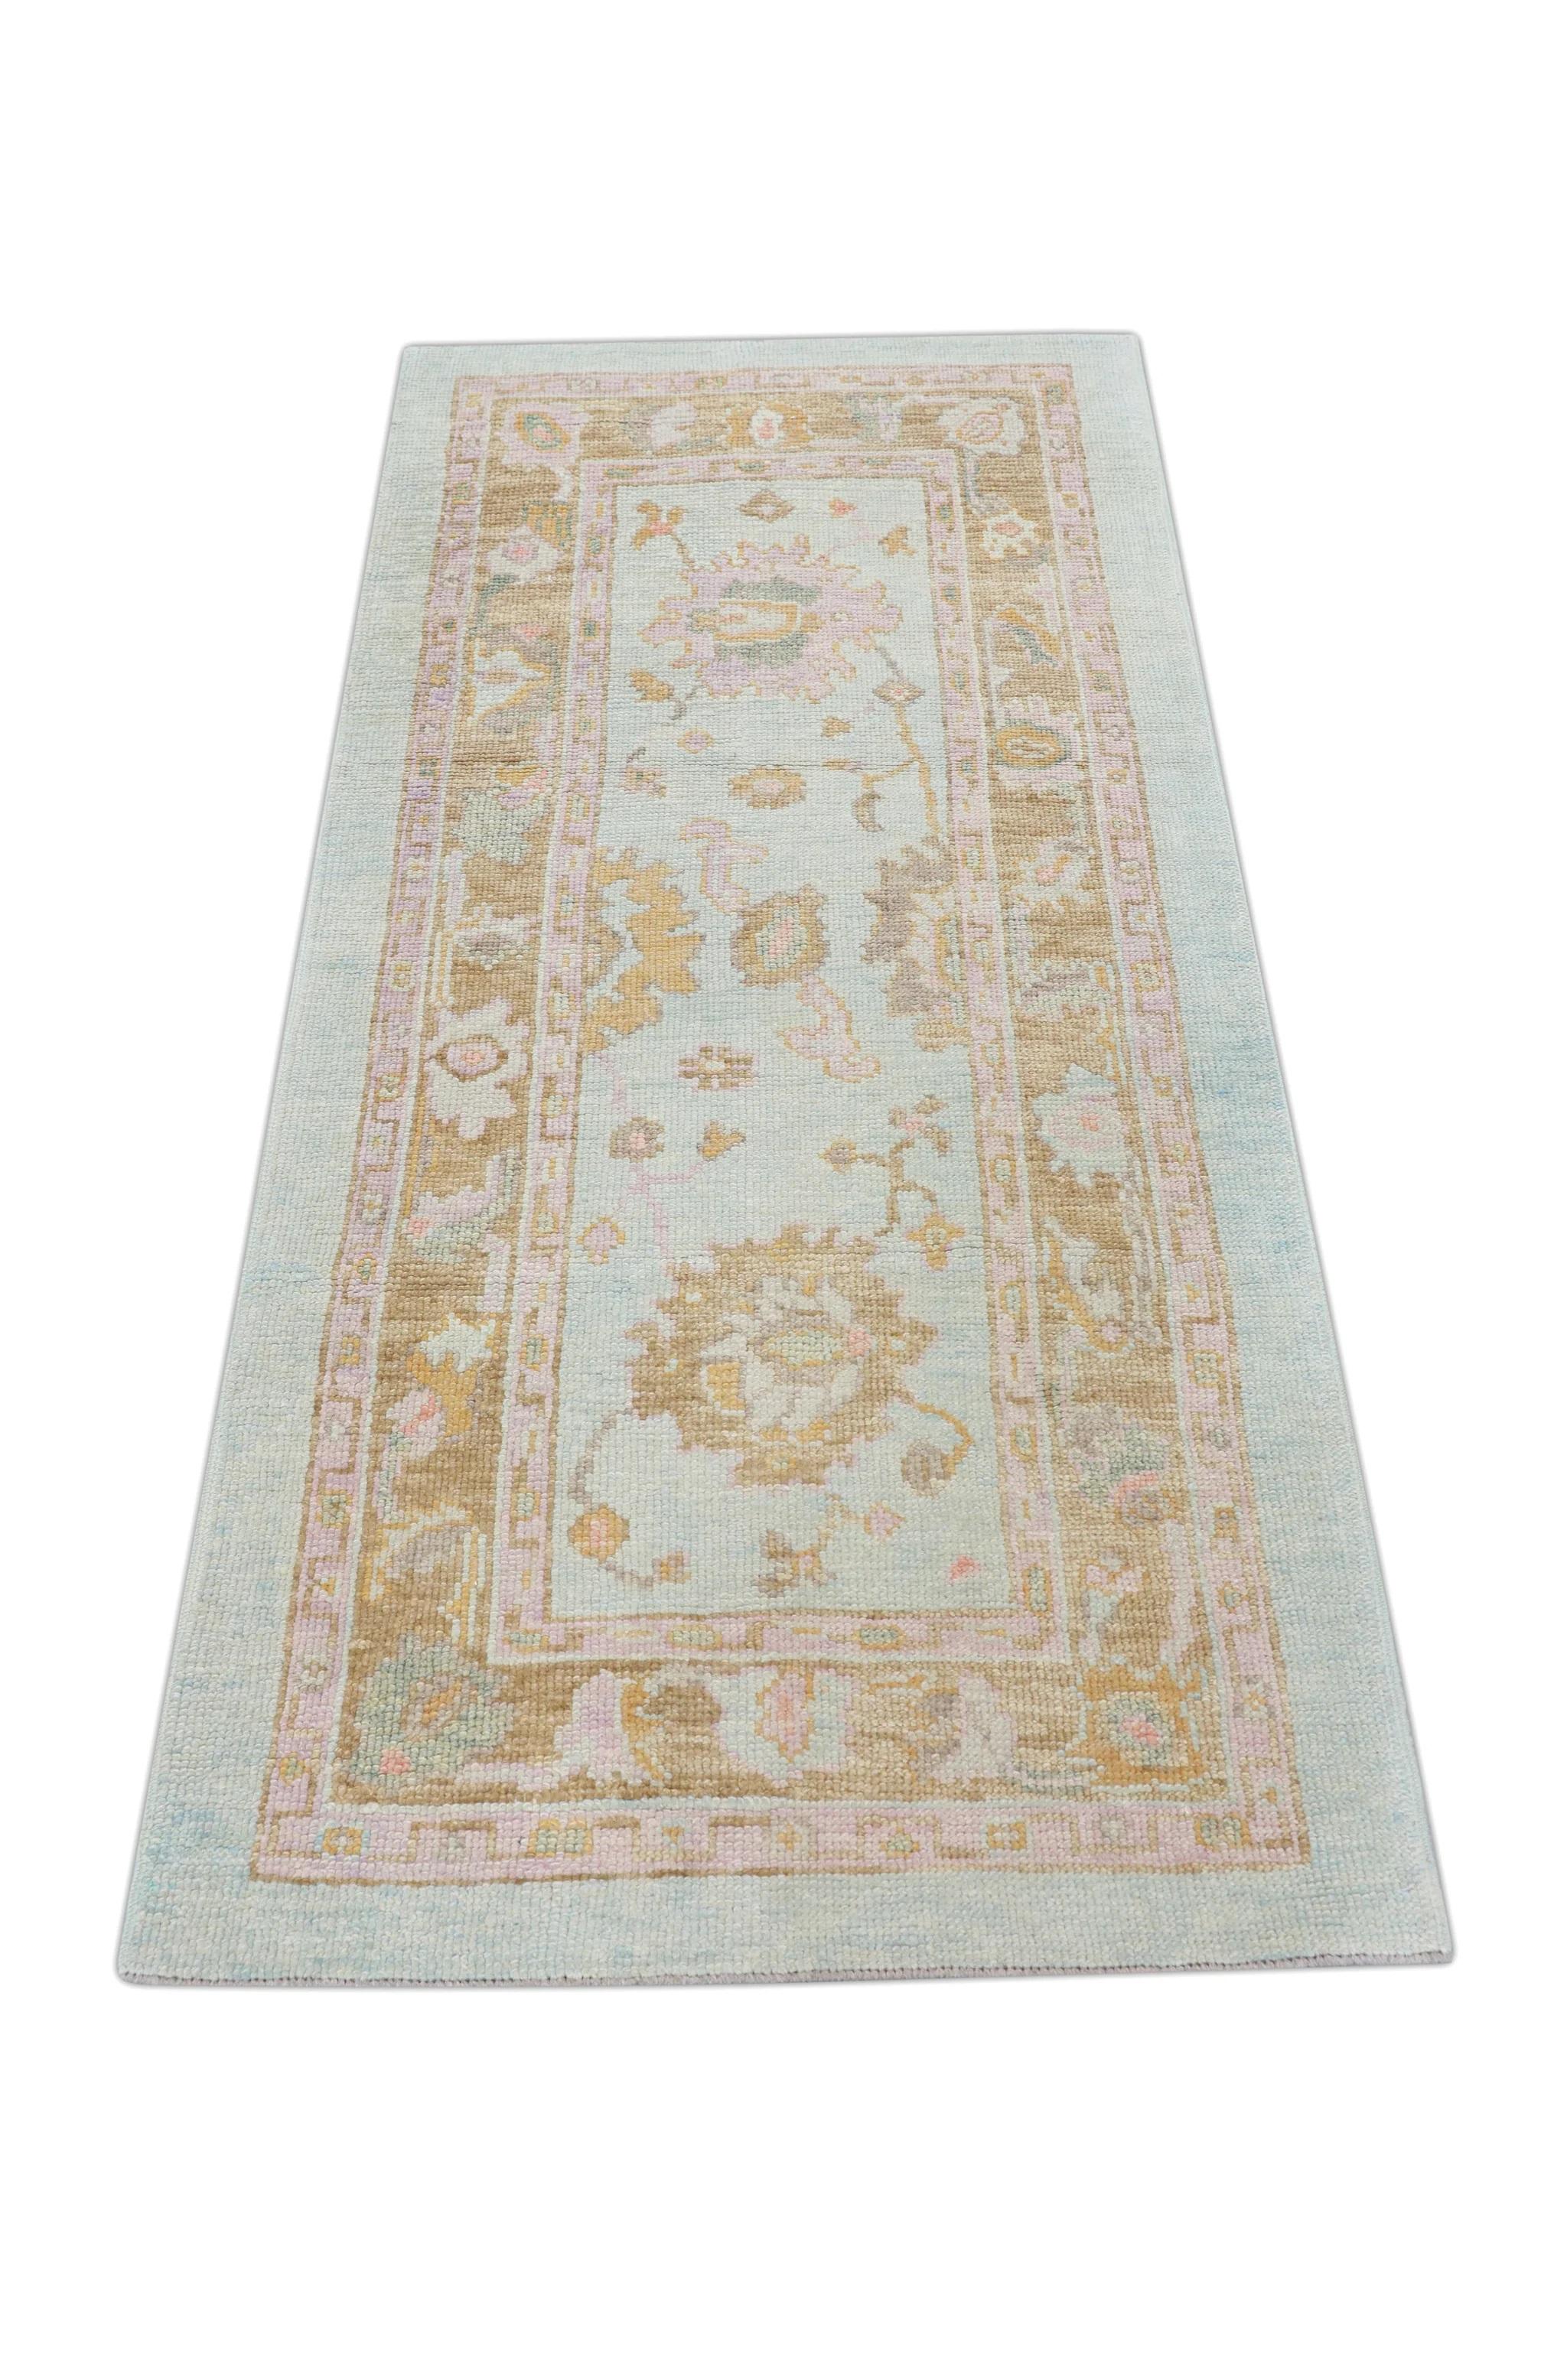 Soft Blue Handwoven Wool Turkish Oushak Rug with Colorful Floral Design 3' x 6'3 For Sale 3